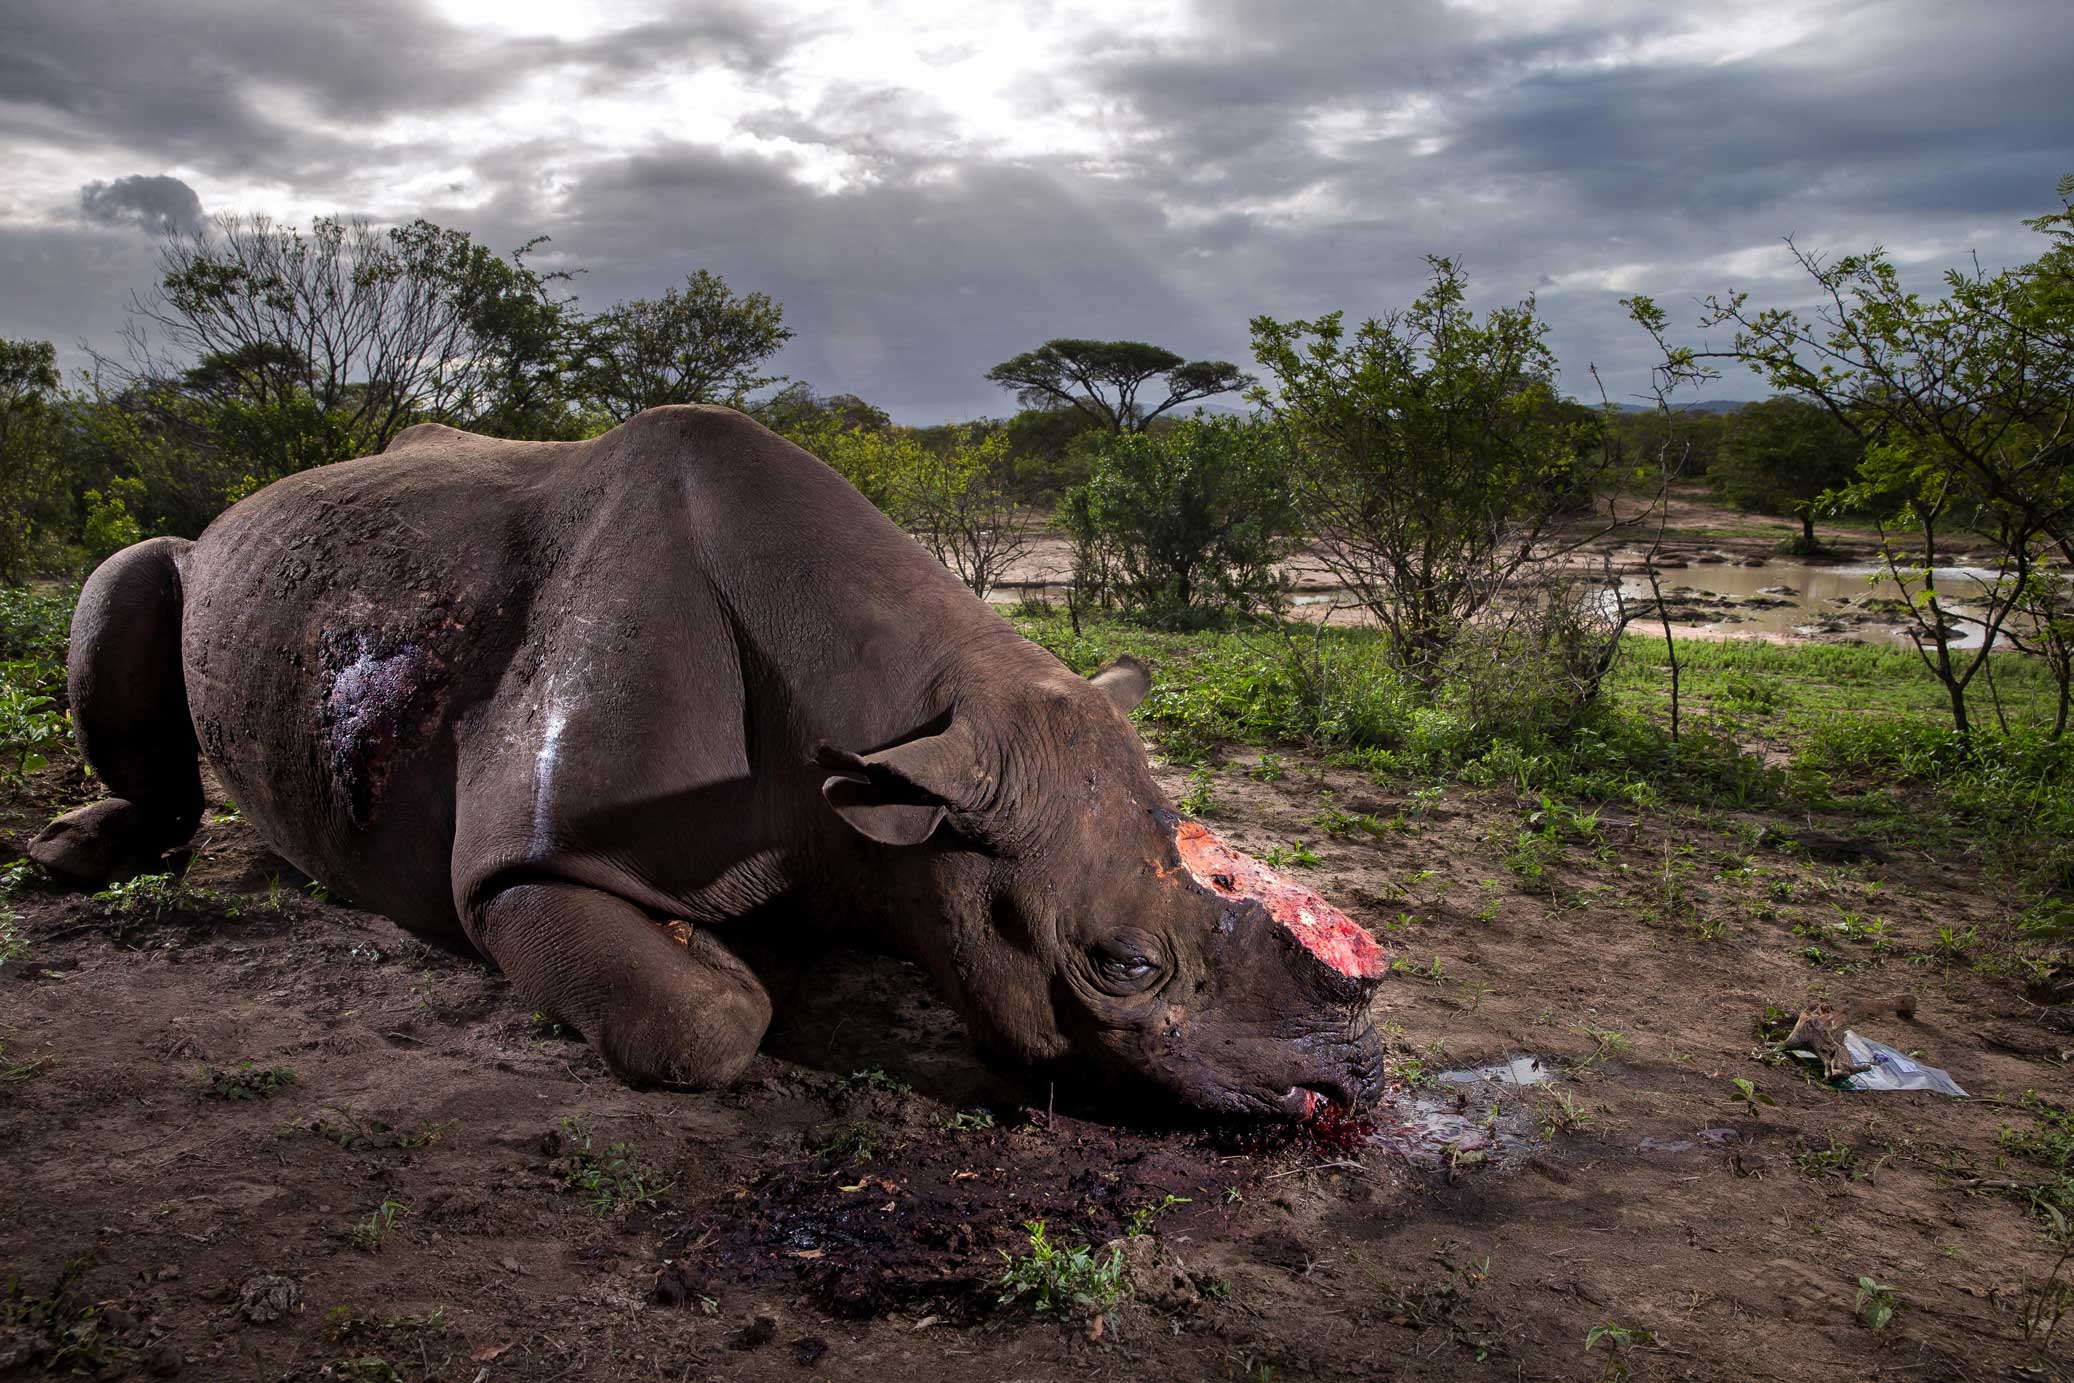 Credit: Brent Stirton, Getty Images for National Geographic Magazine